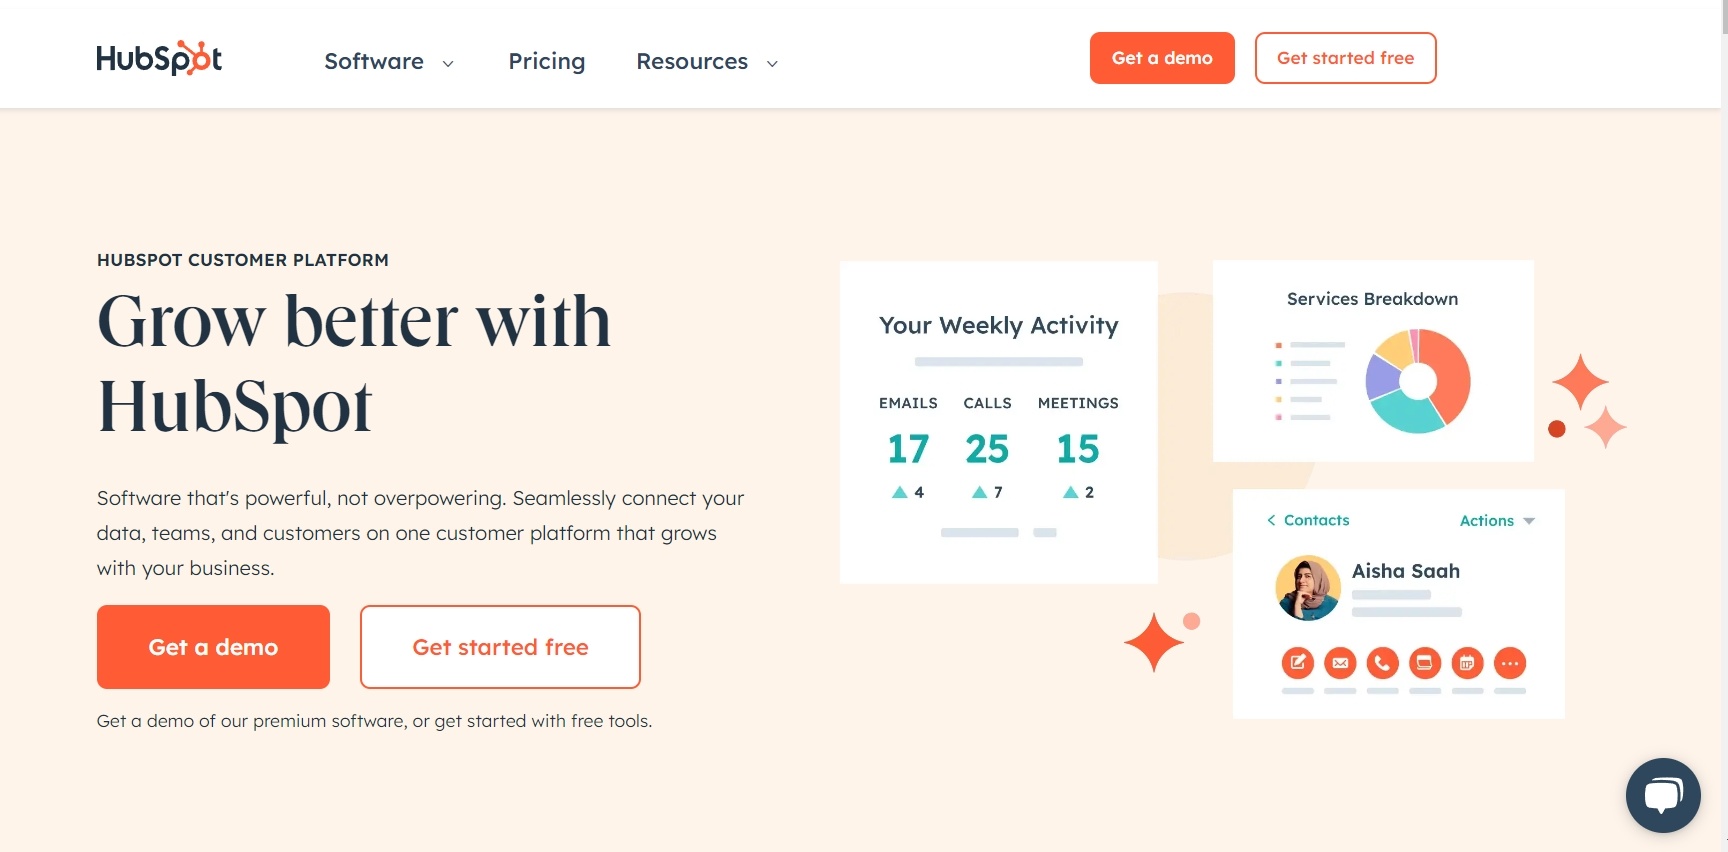 HubSpot’s CRM that includes email automation features